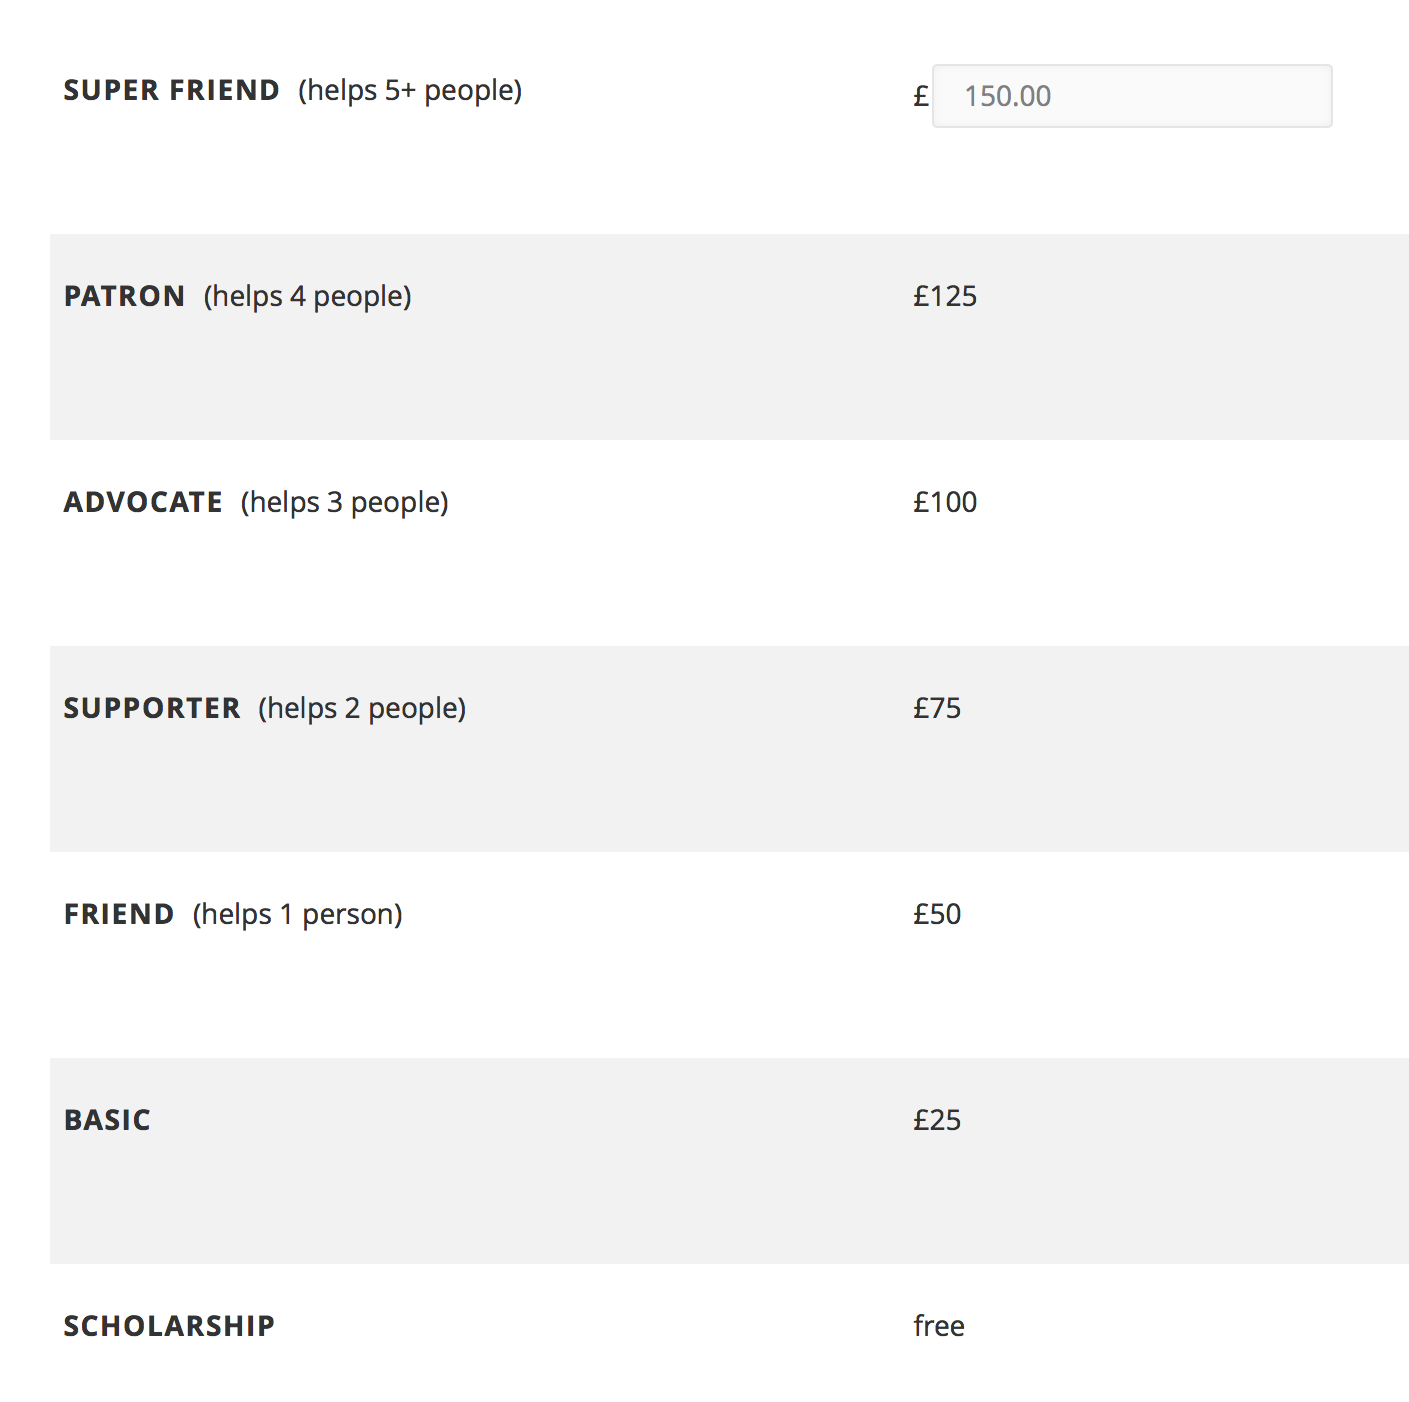 A screenshot from the AlterConf ticket page. A basic ticket is £25, a friend ticket (helps 1 person) is £50, supporter (helps 2 people) is £50, and so on up to super friend (helps 5+ people) for £150 and up.